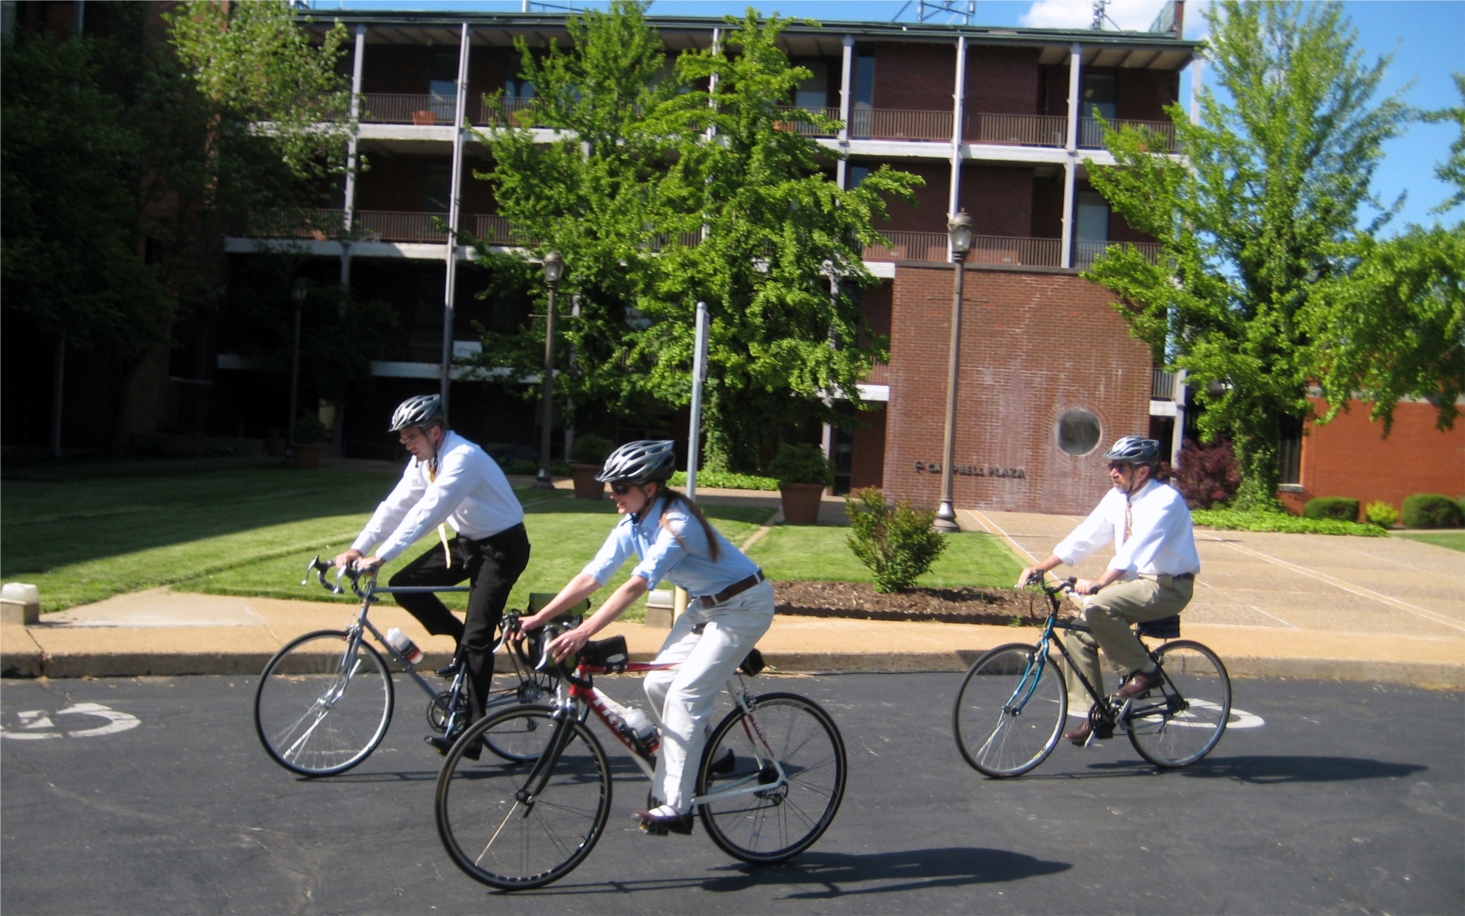 Employees taking advantage of a nice day by getting some exercise using the Company bikes.